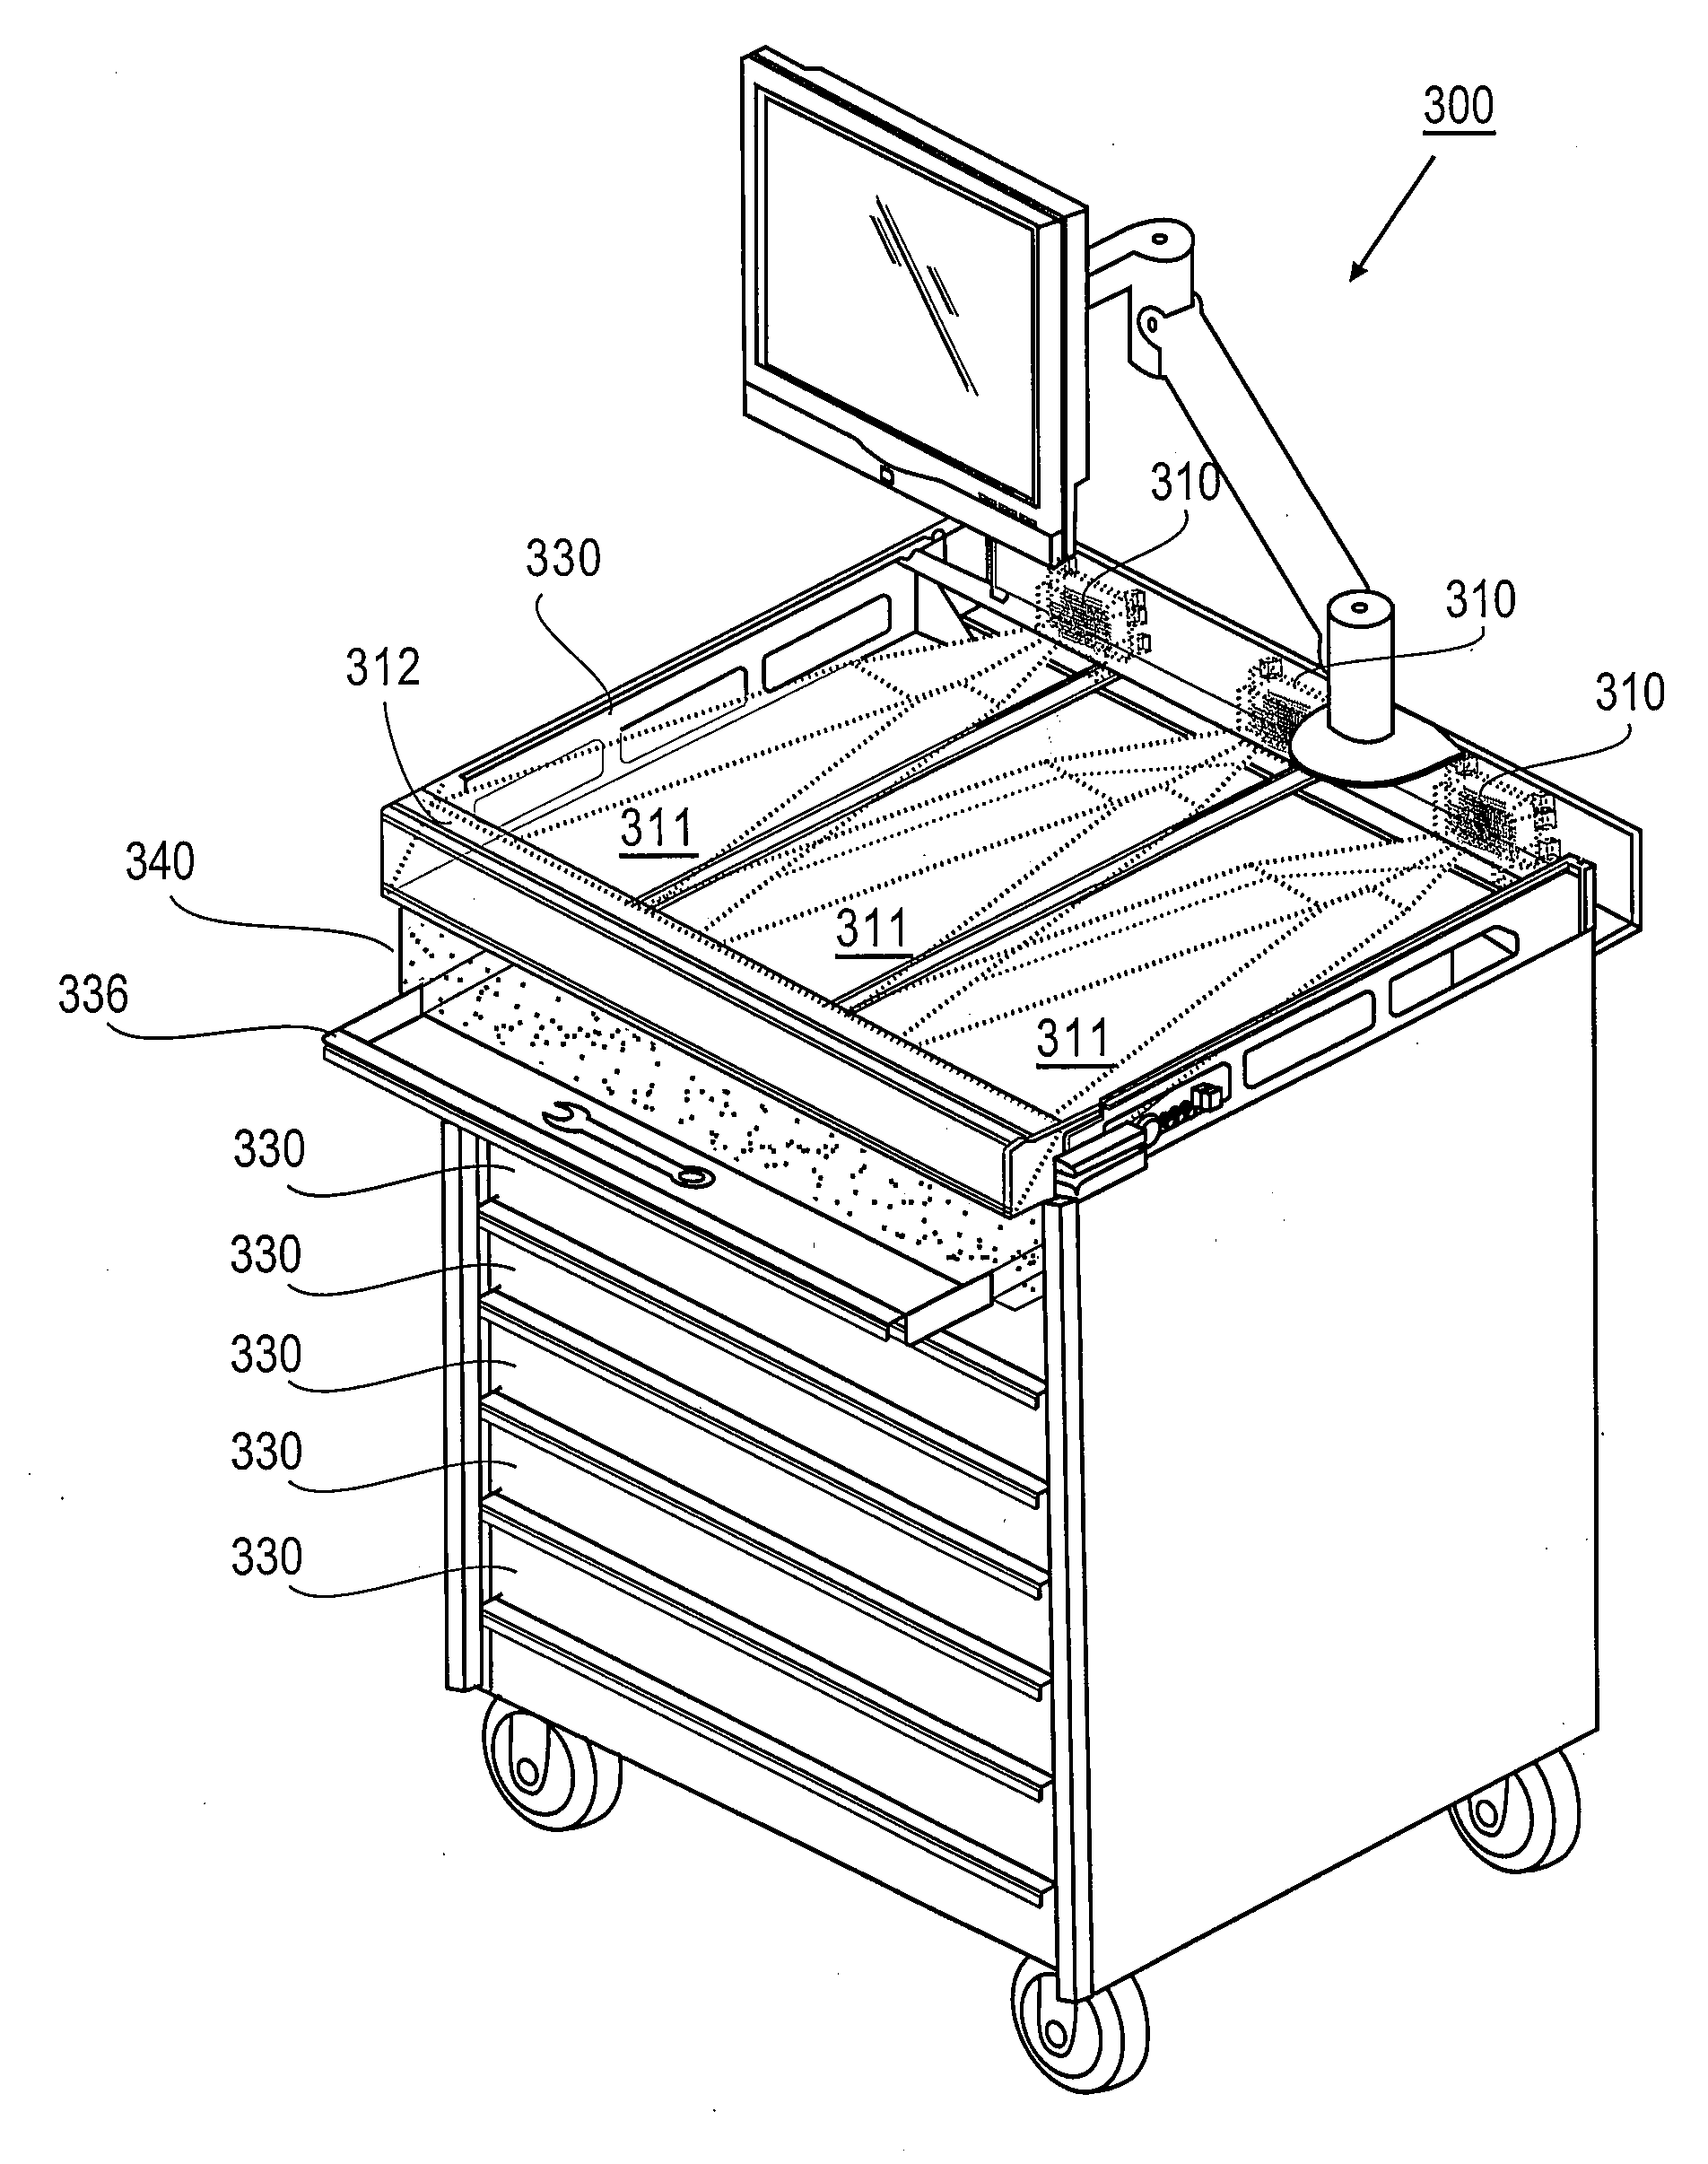 Image-based inventory control system with automatic calibration and image correction